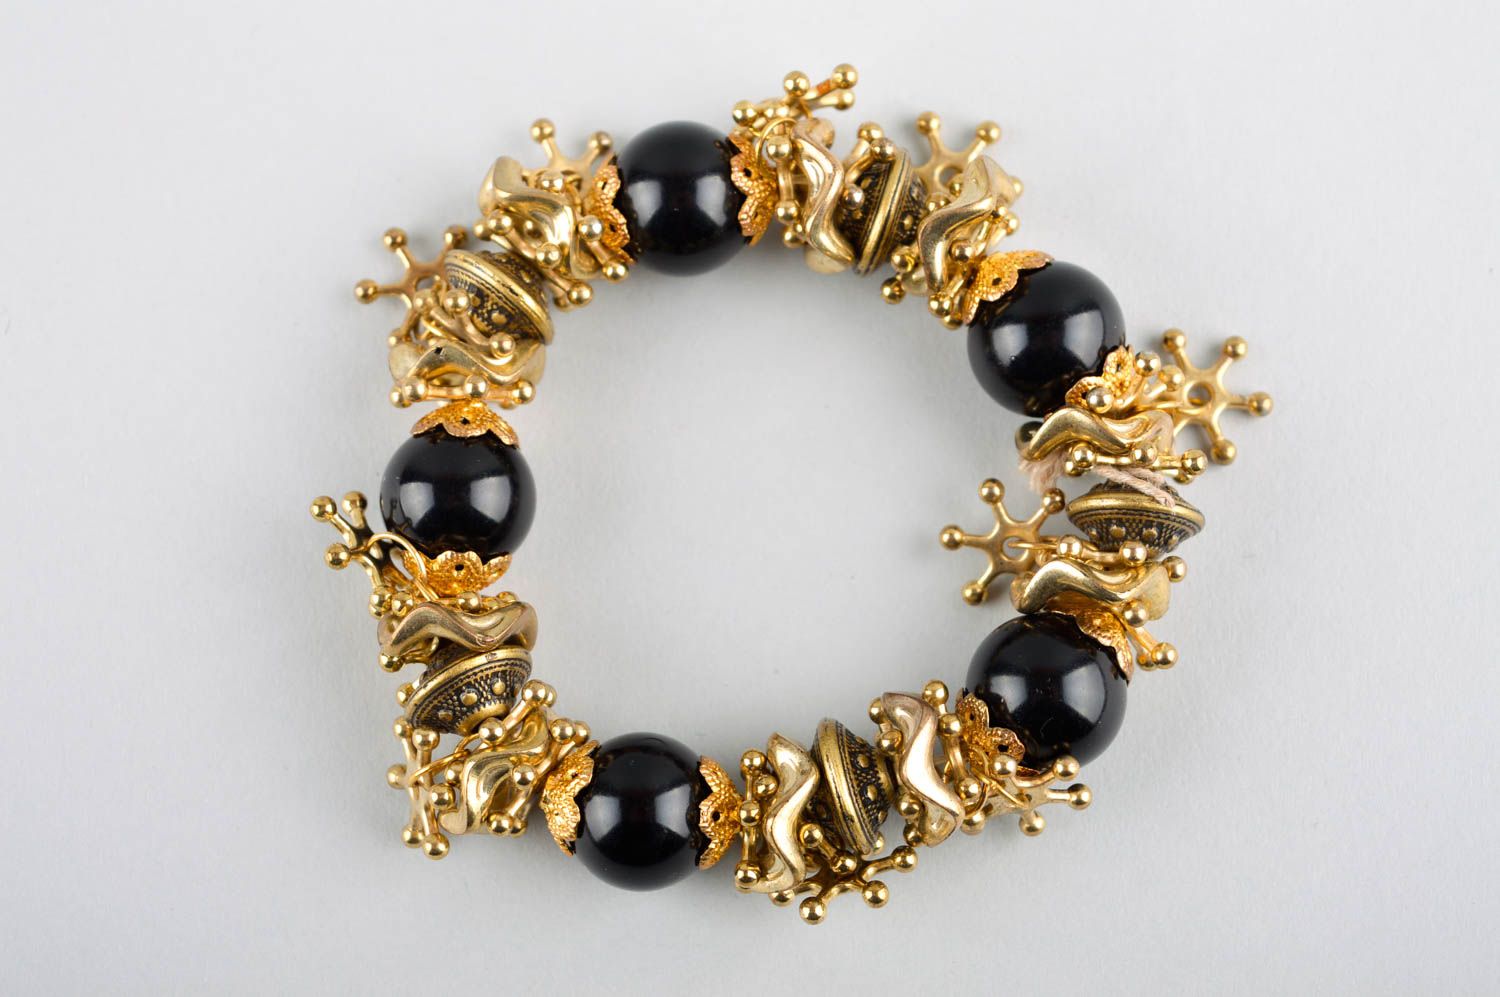 Elastic stretchy bracelet with black beads and golden color charms for teen girl photo 2